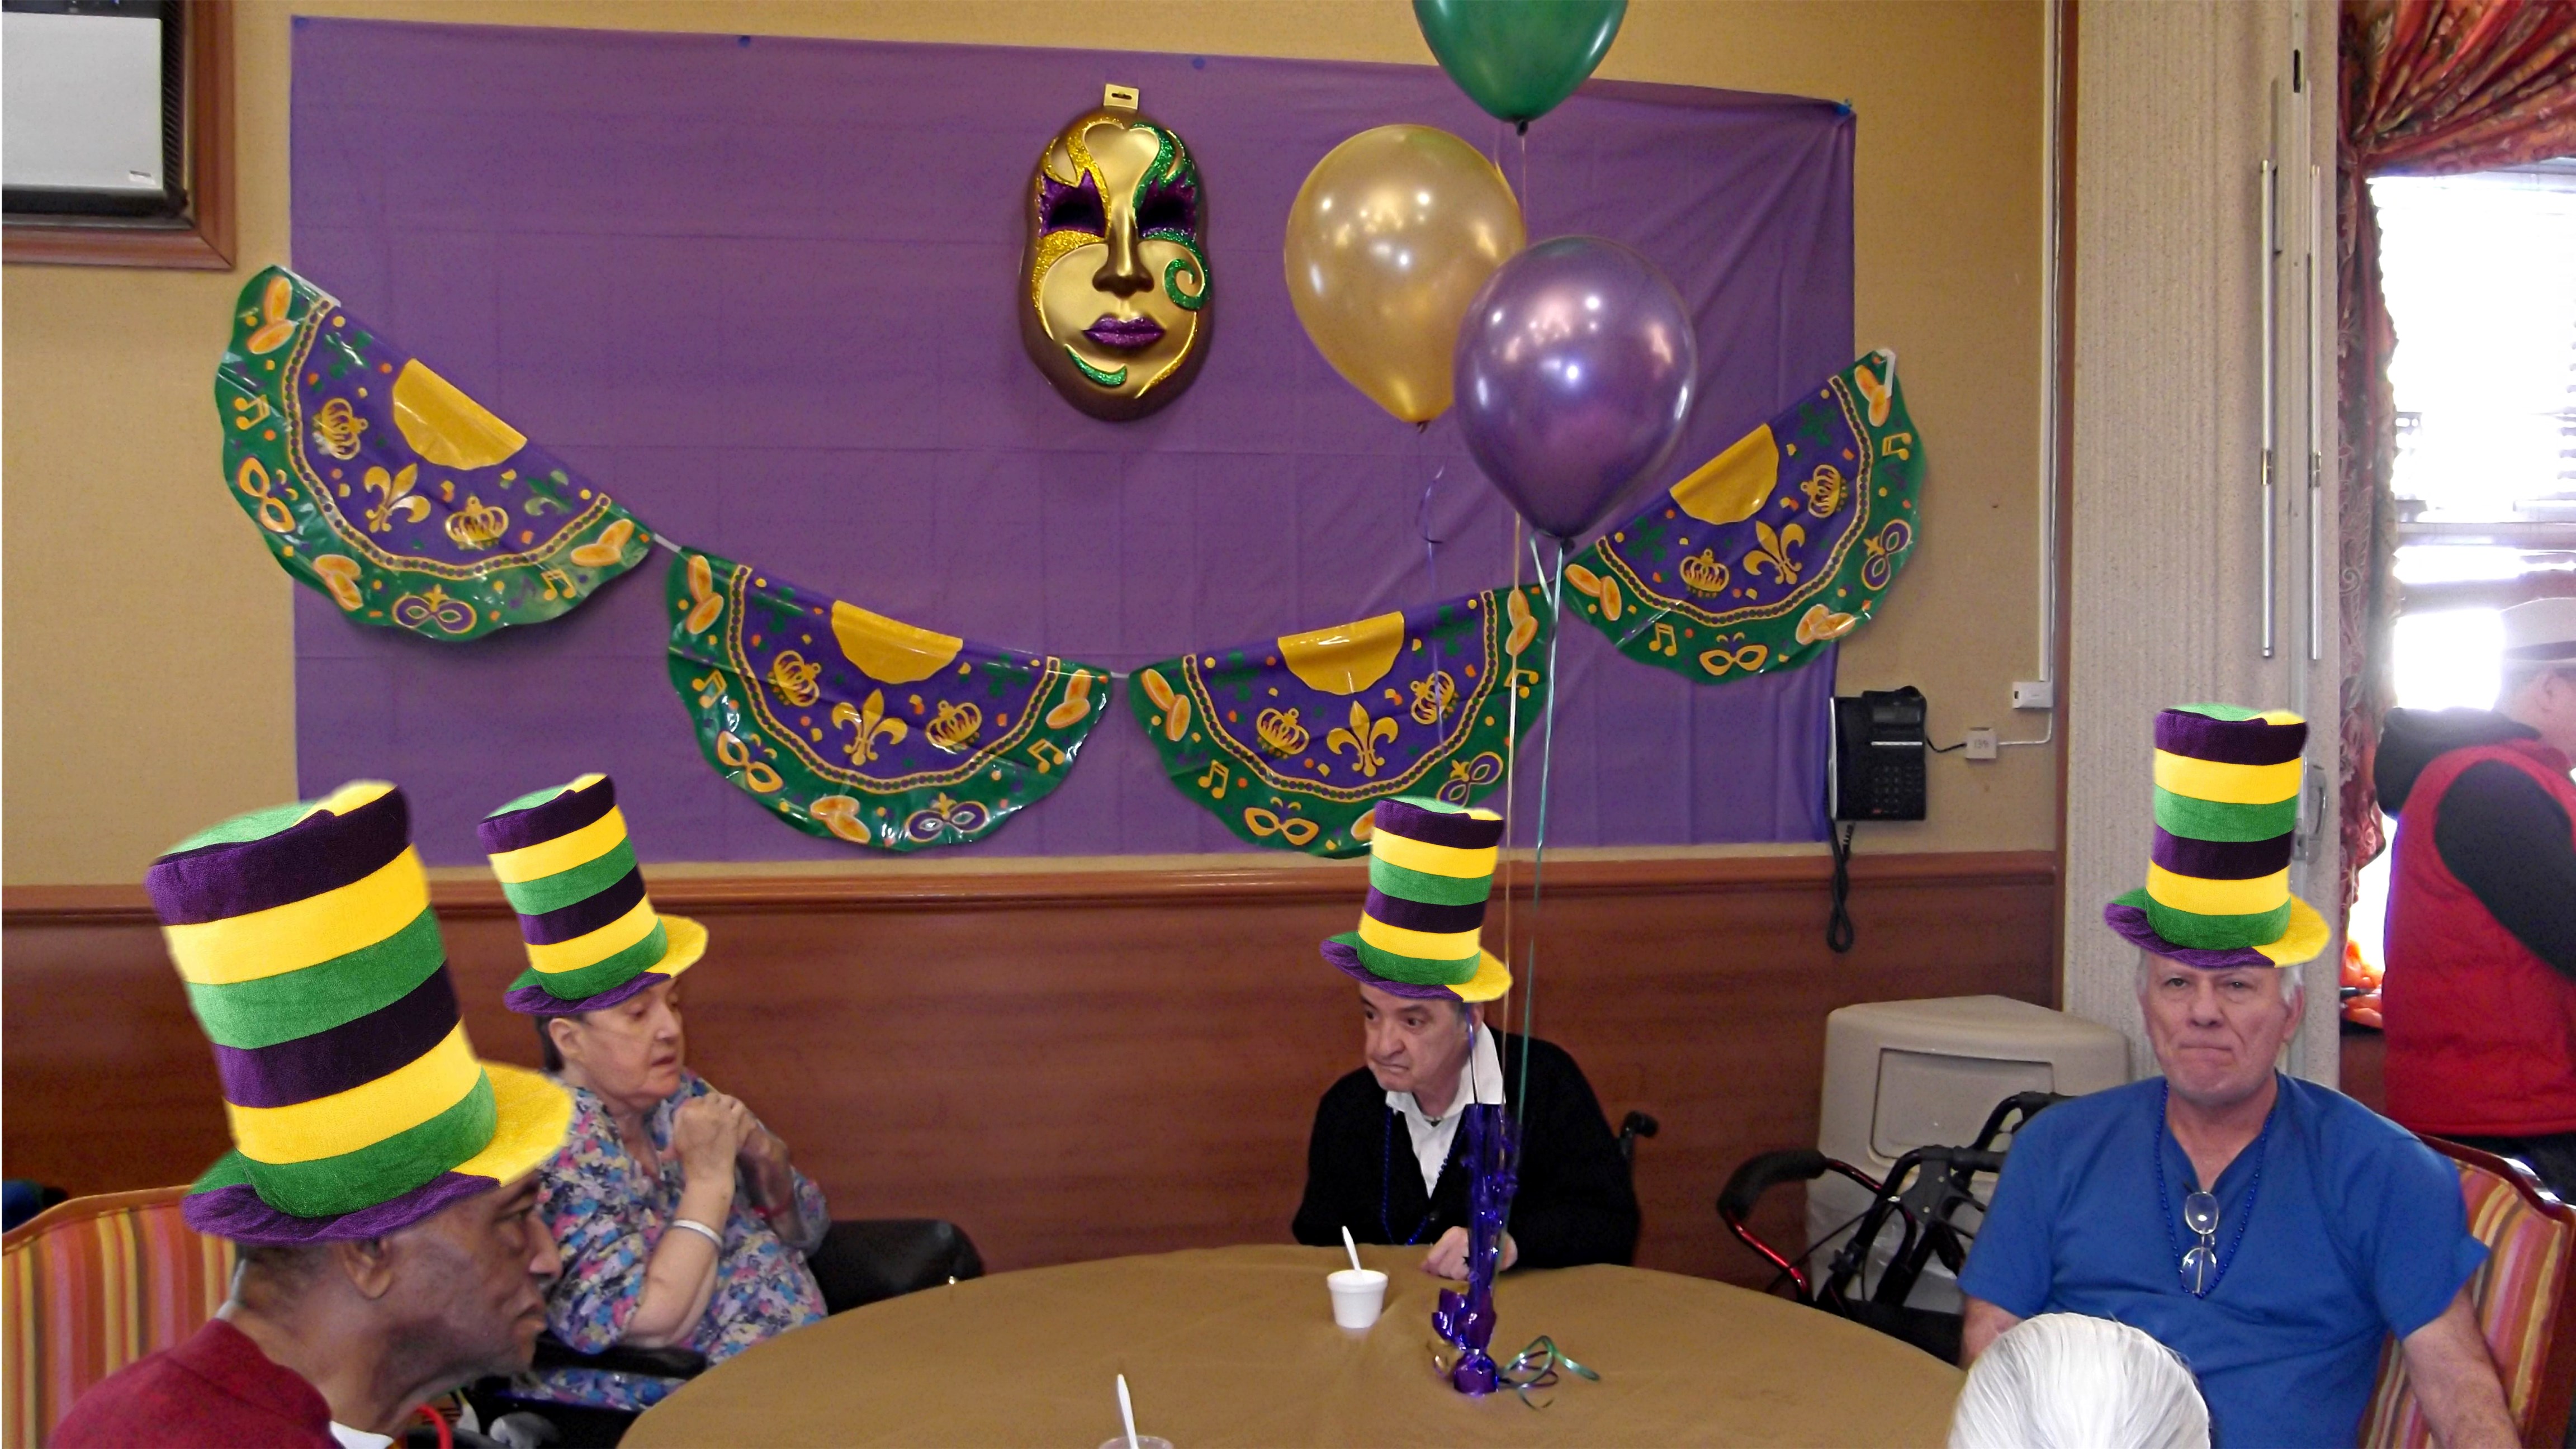 It's Mardi Gras Time-Time to Party